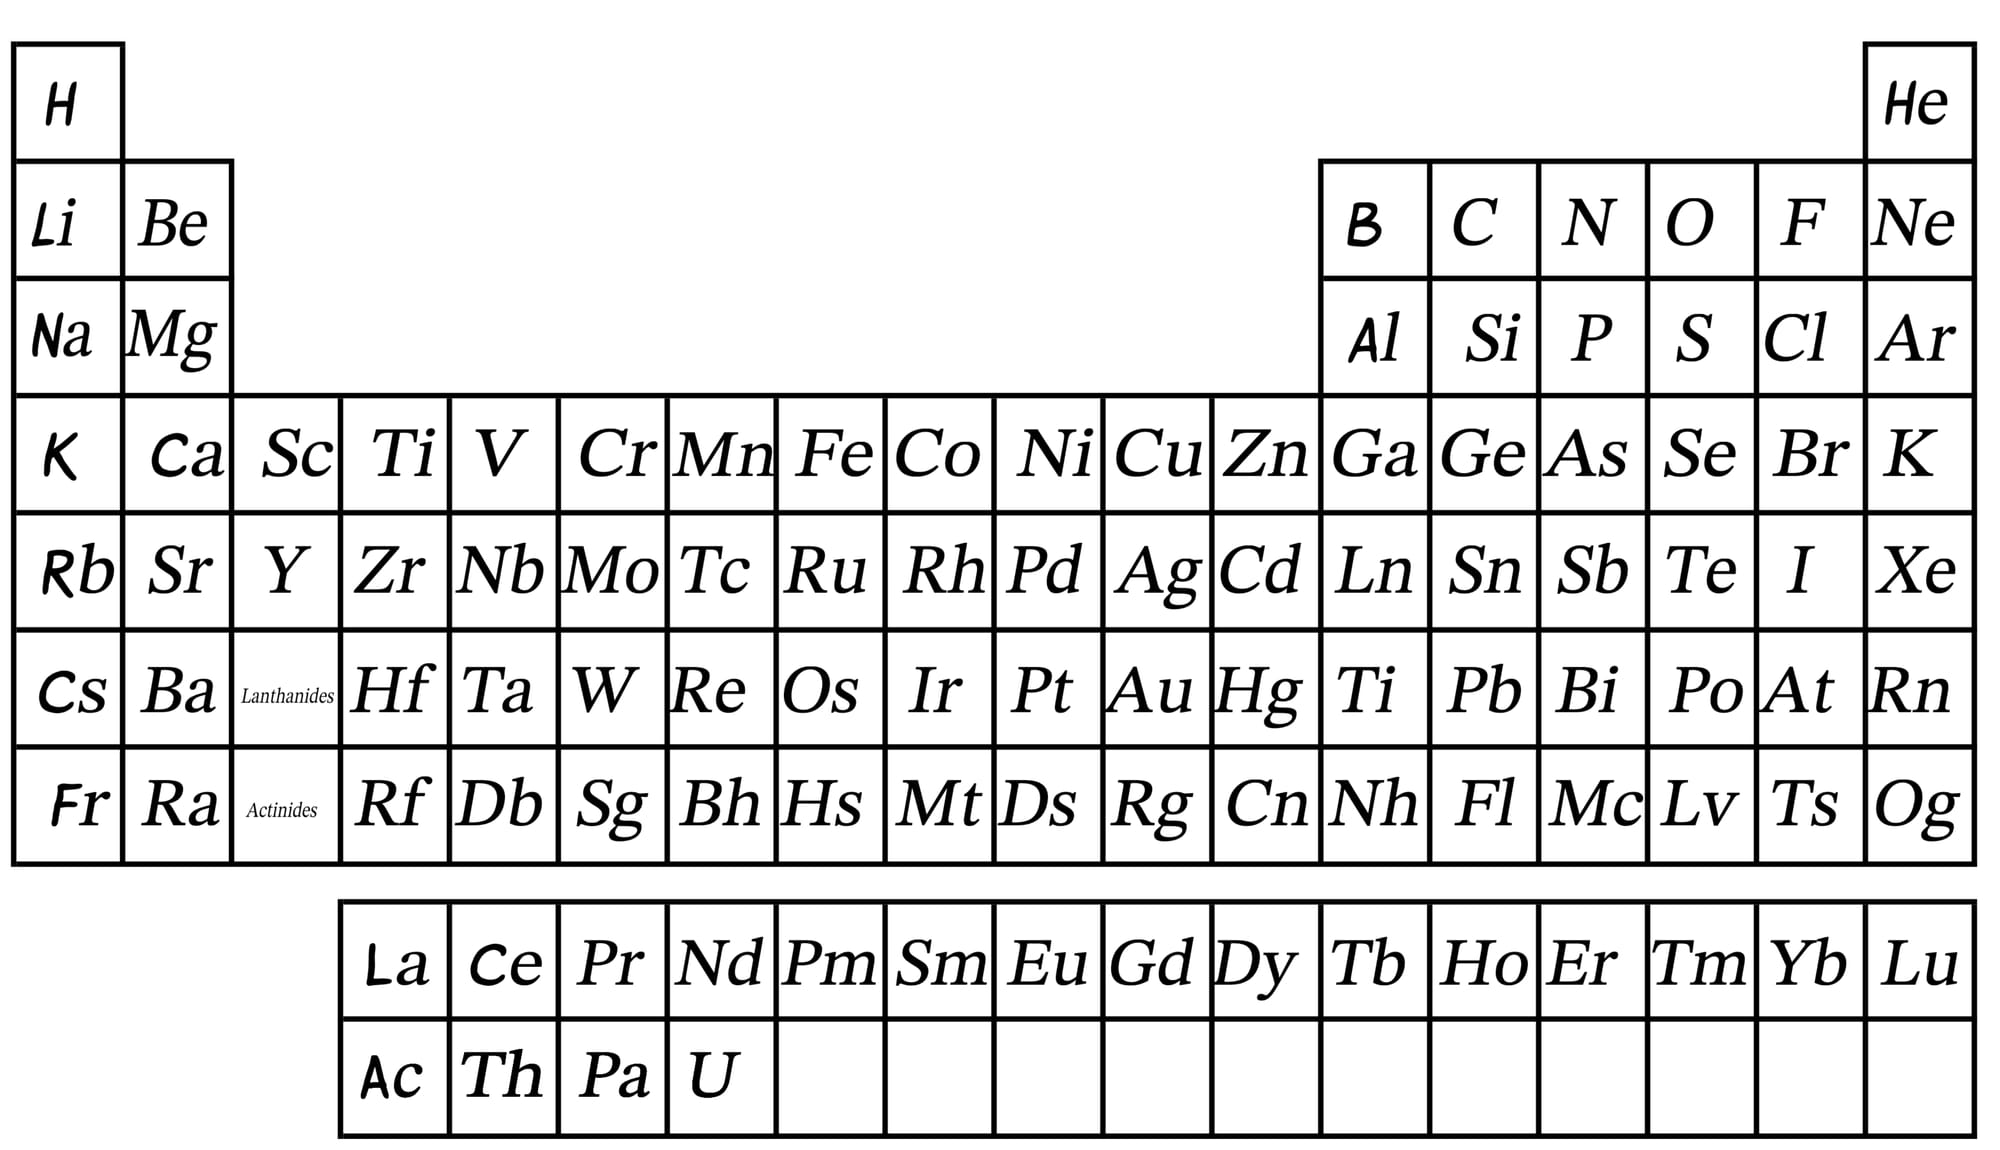 Mendeleev and the periodic table